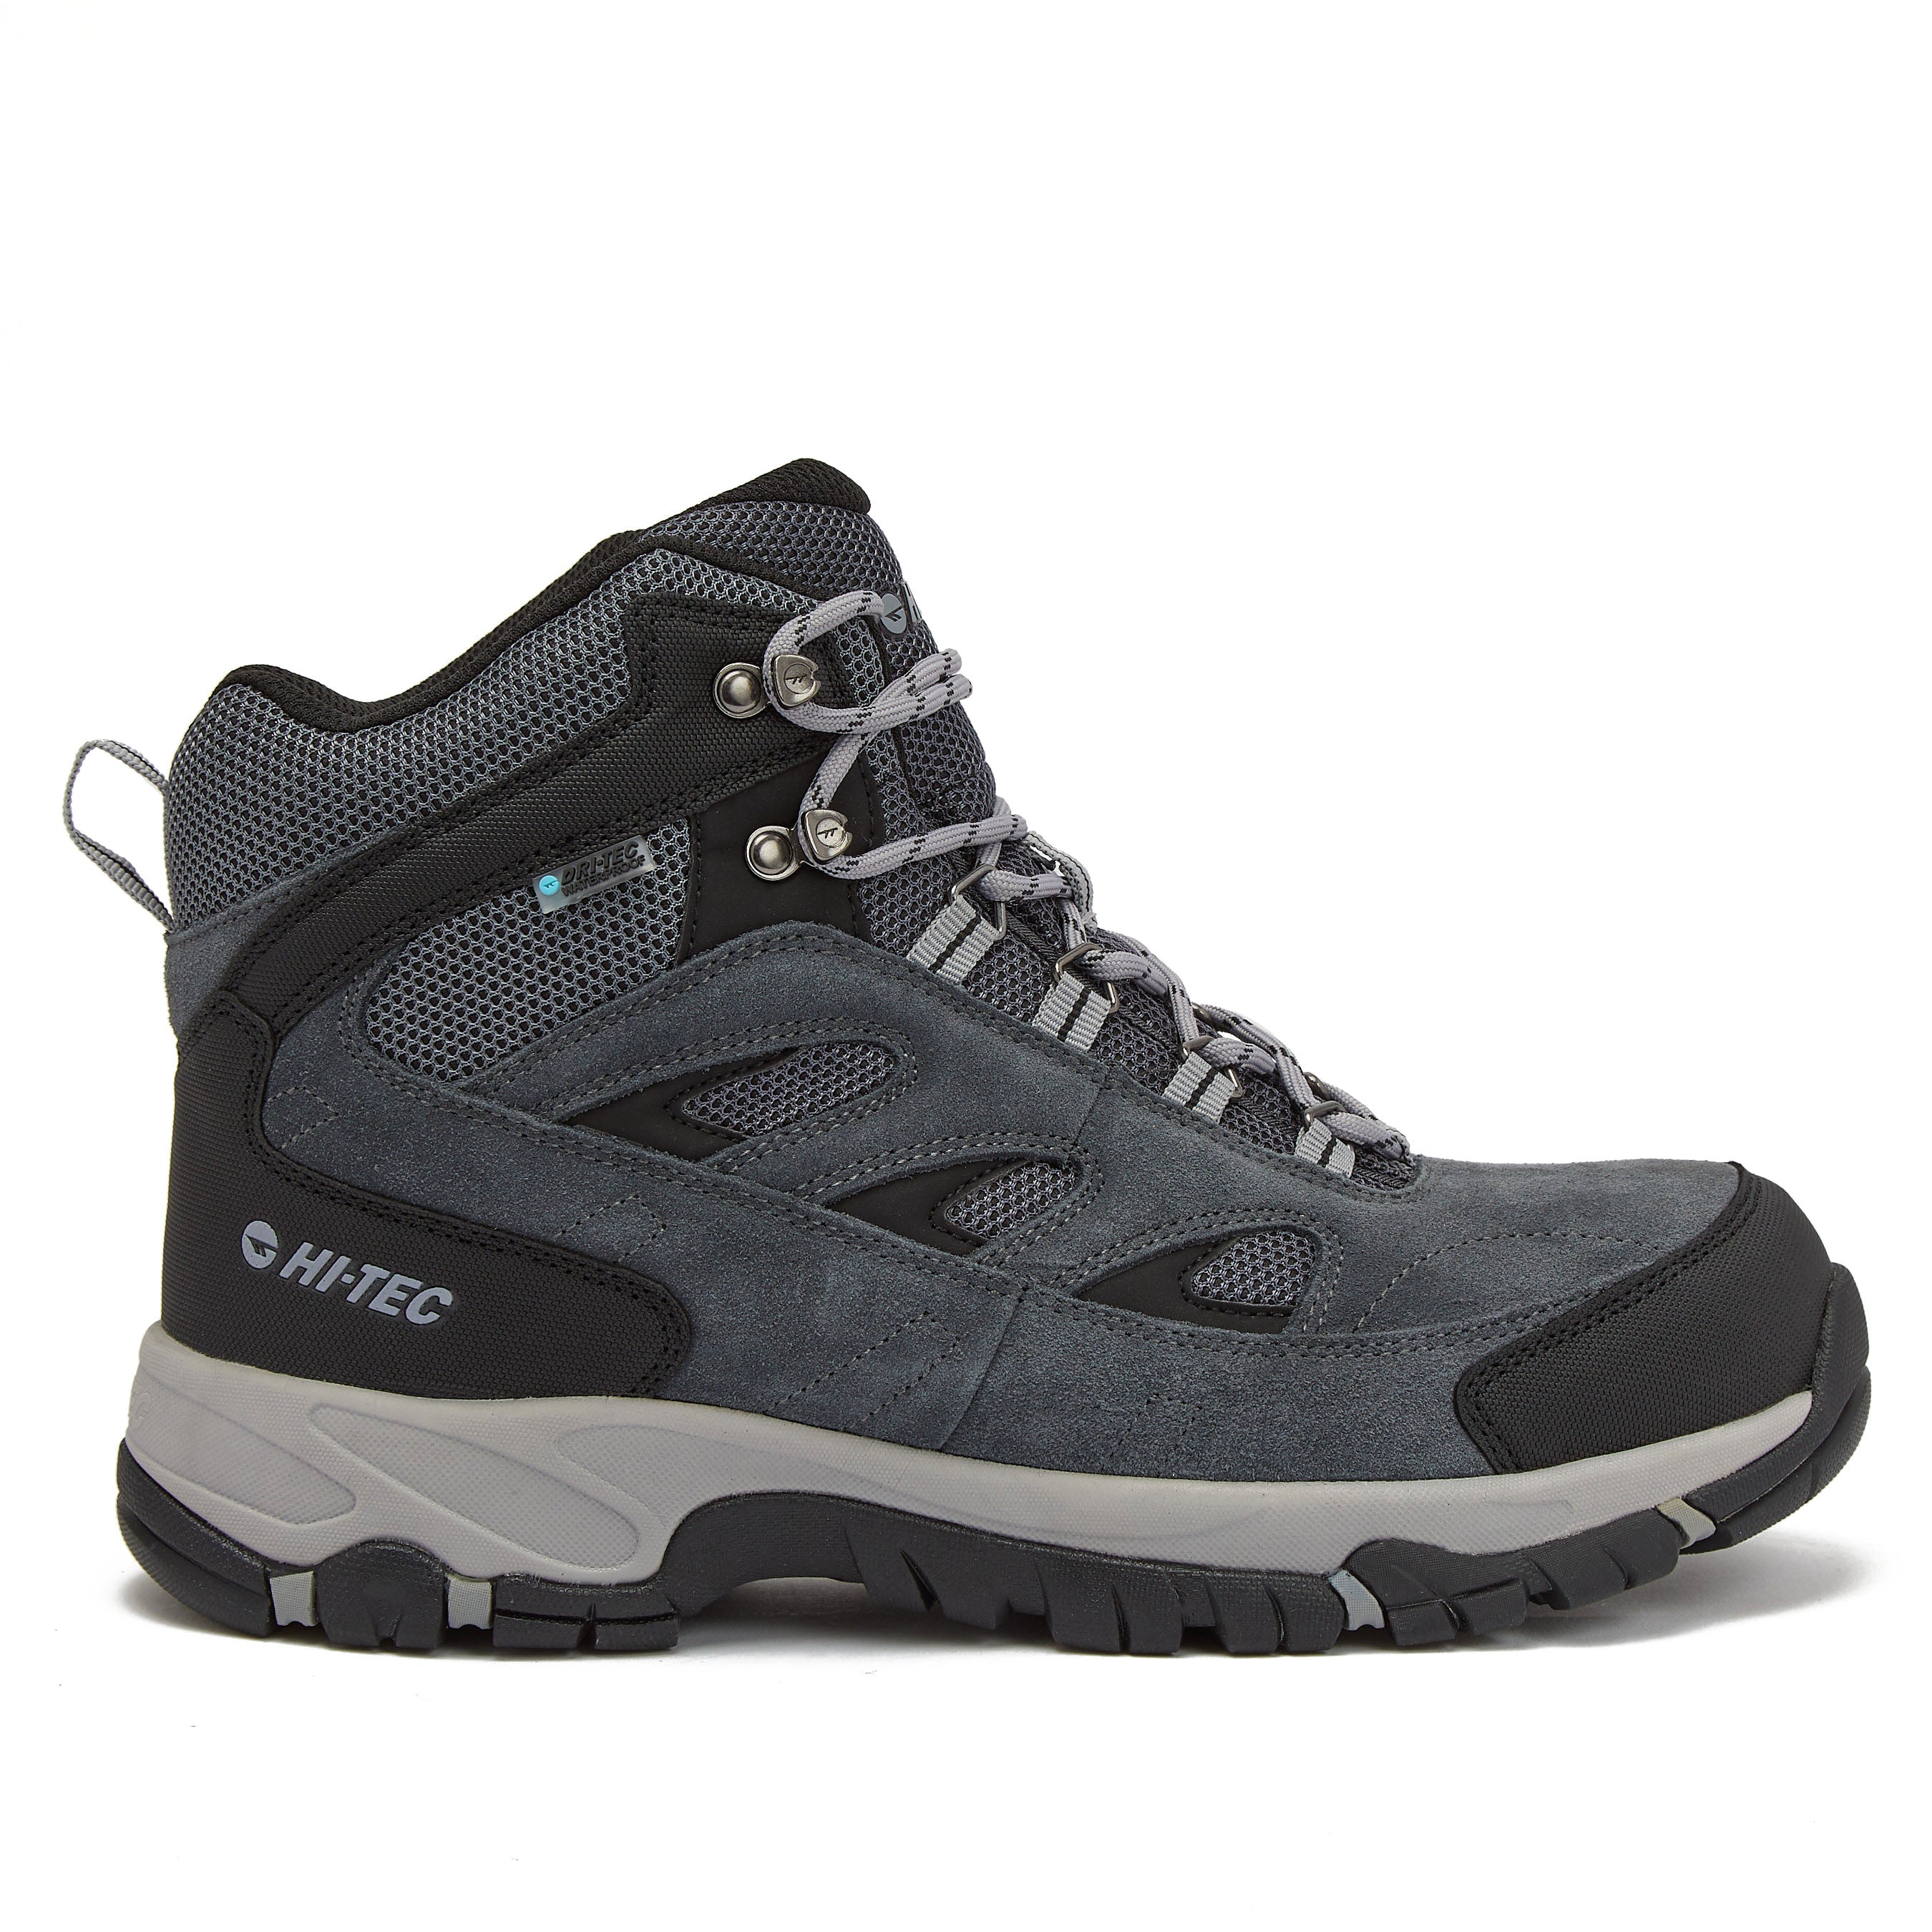 for Women Shoes & and Hi-Tec Men – Trail Hiking Boots